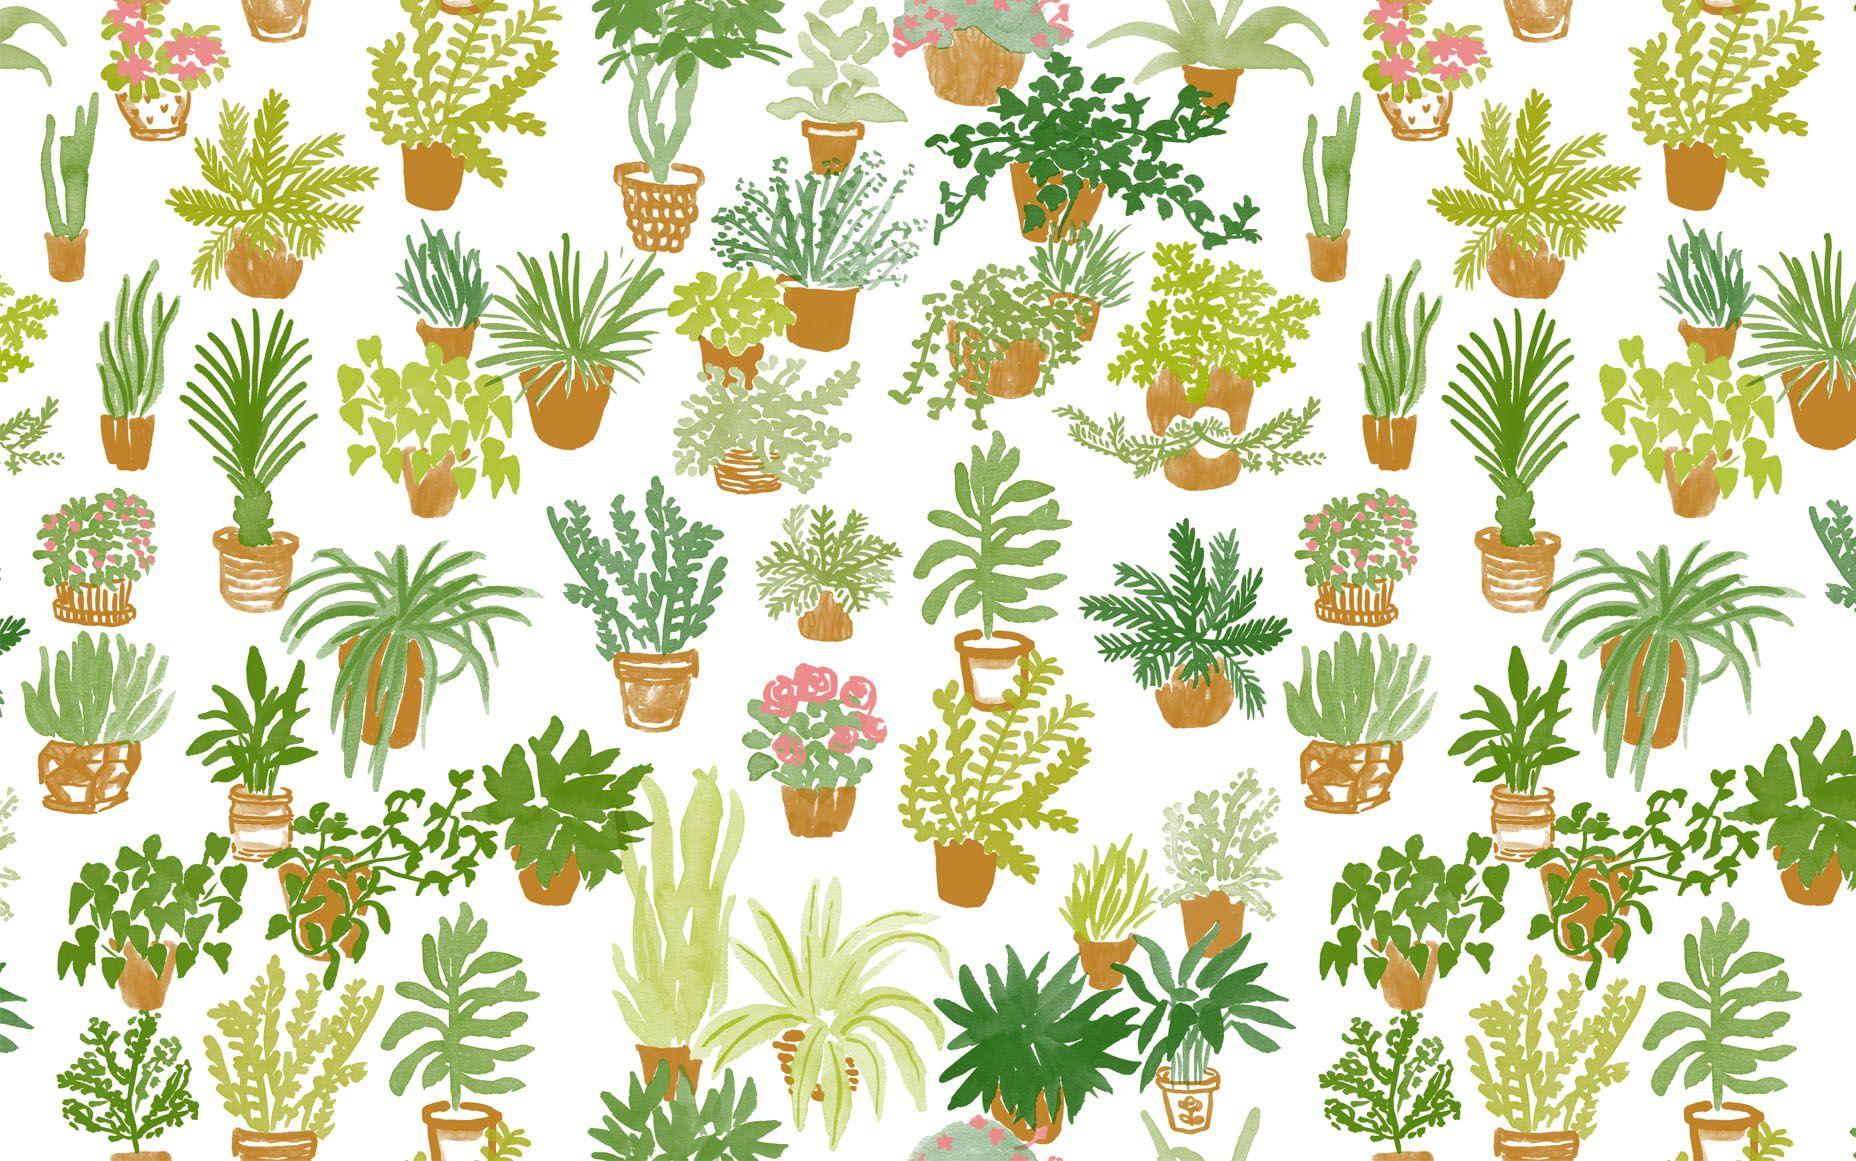 A pattern of illustrated houseplants in pots - Botanical